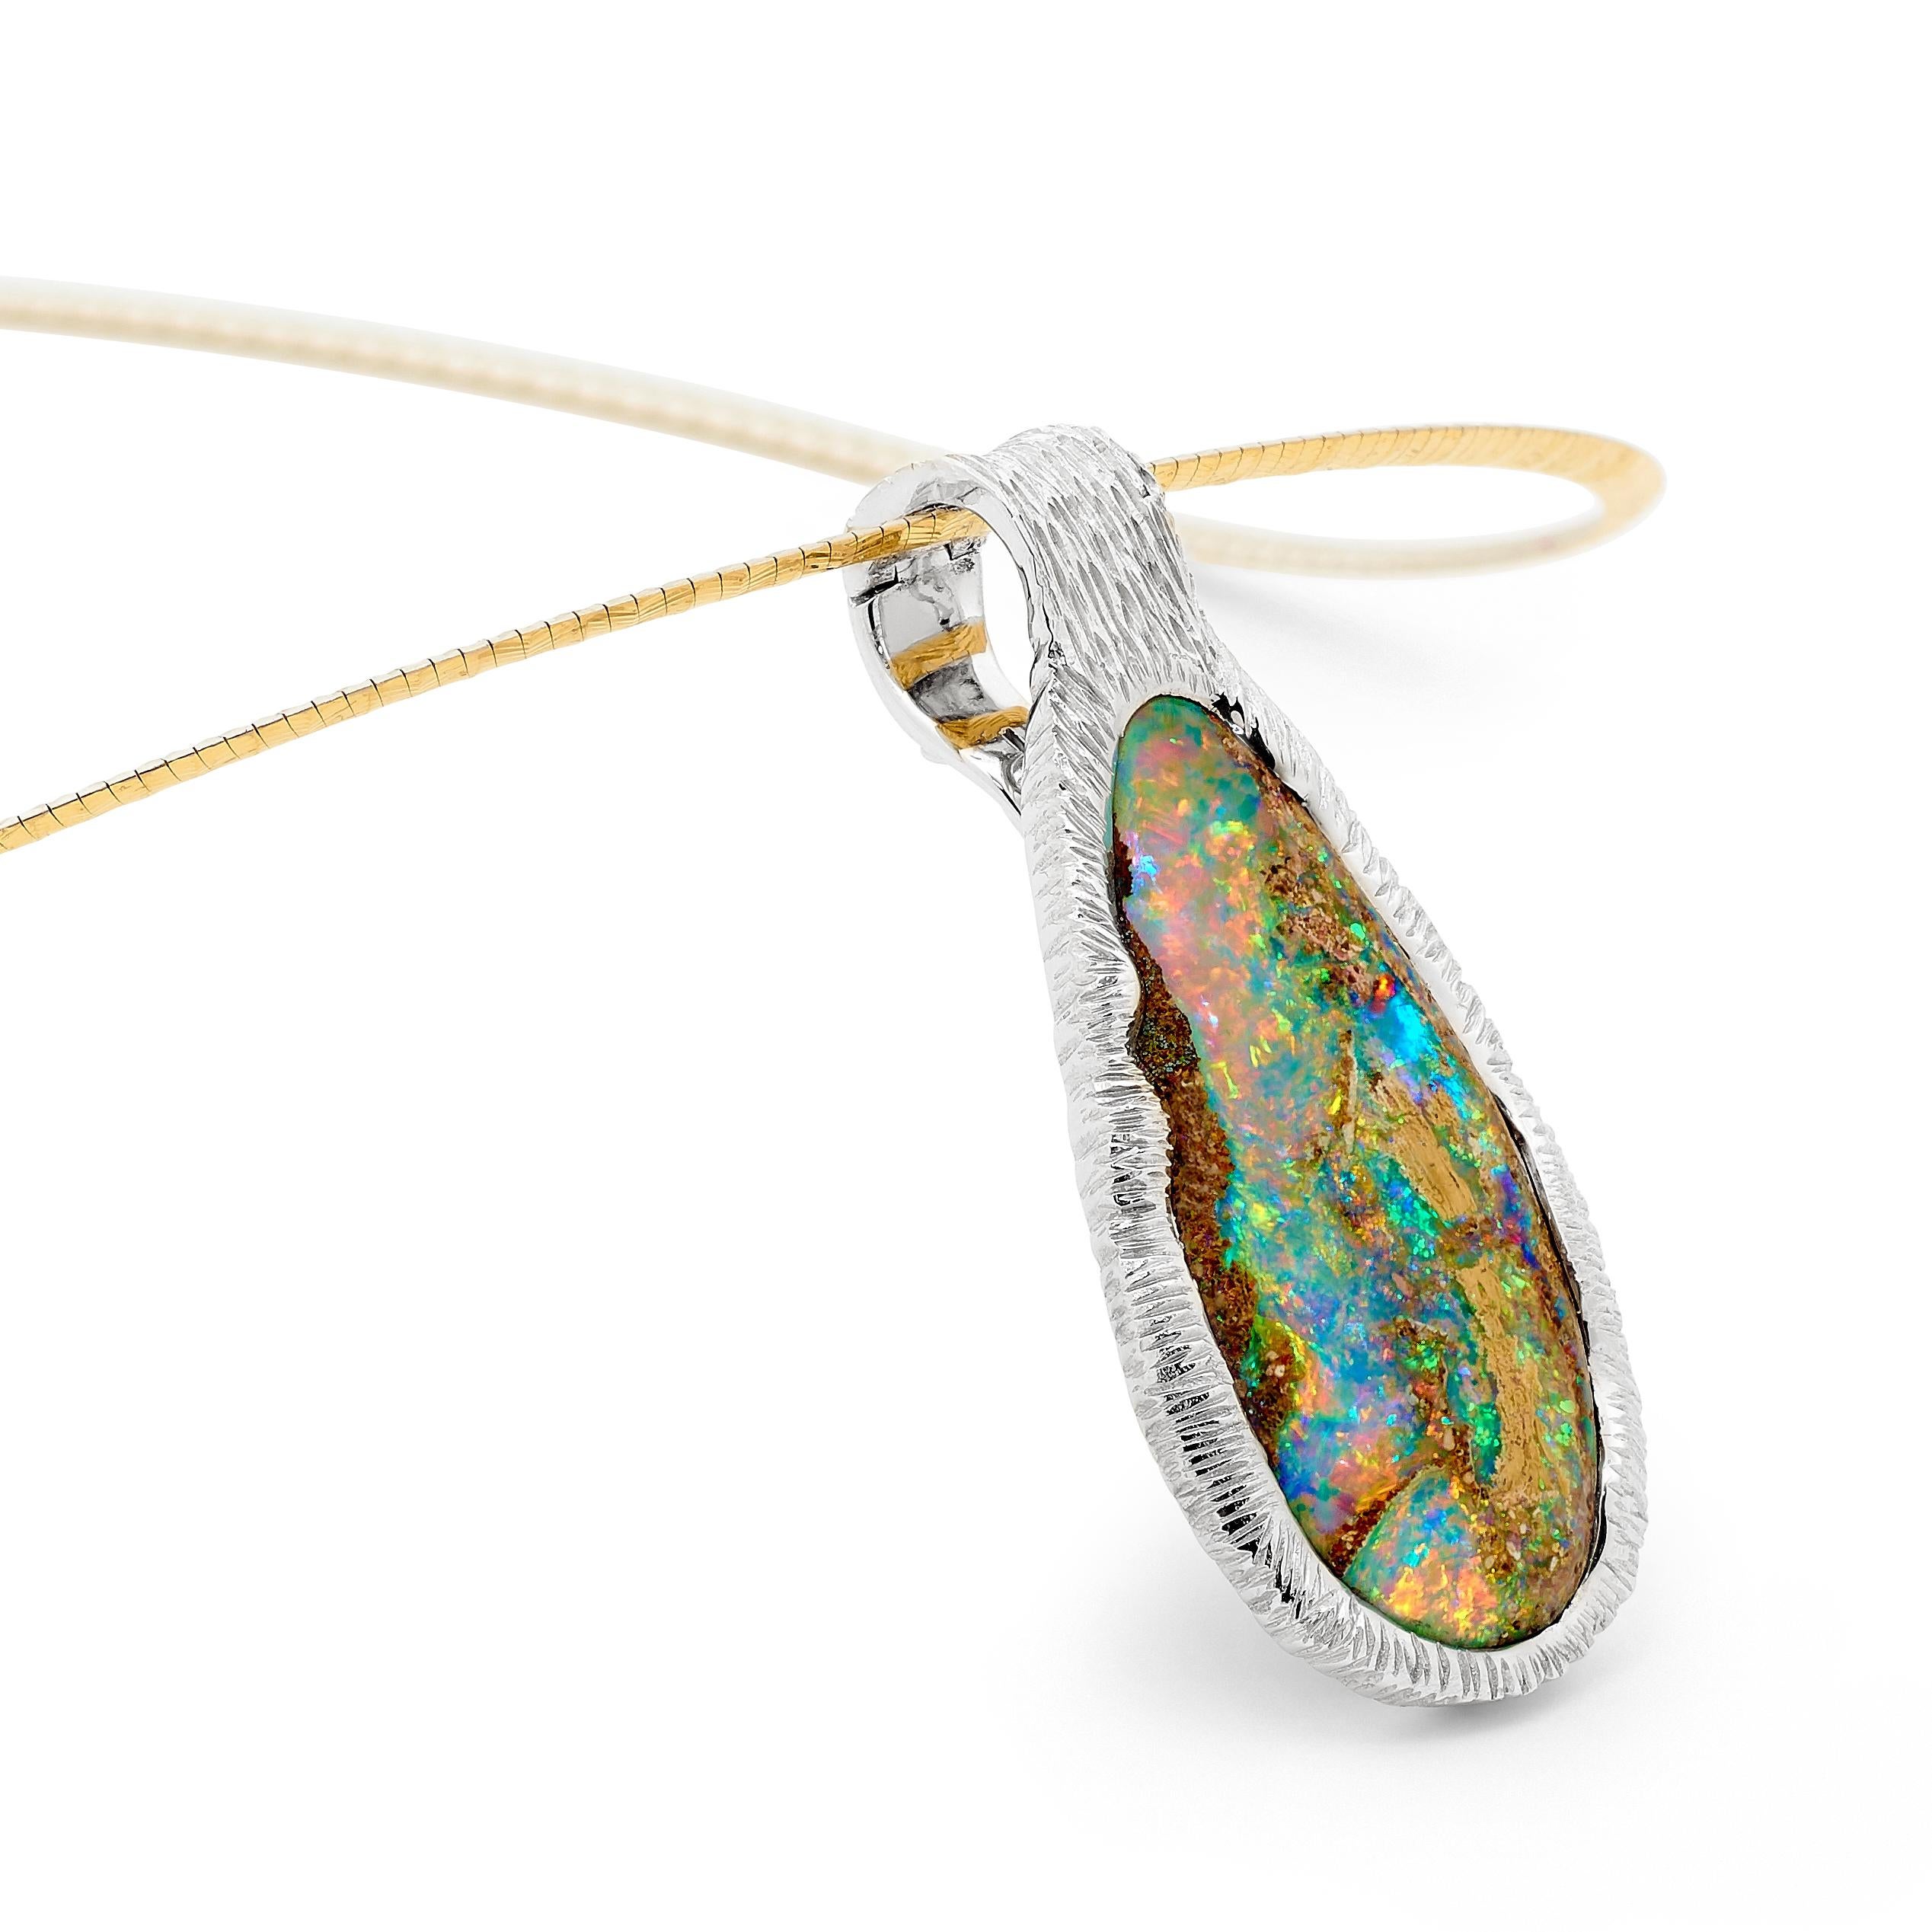 “Life Plentiful” presents a splendid 21.60 carat boulder opal from our Jundah-Opalville mines wrapped in 18K white gold. The beauty of this piece lies in the element of surprise; just when you think you know it well it reveals yet another bright and